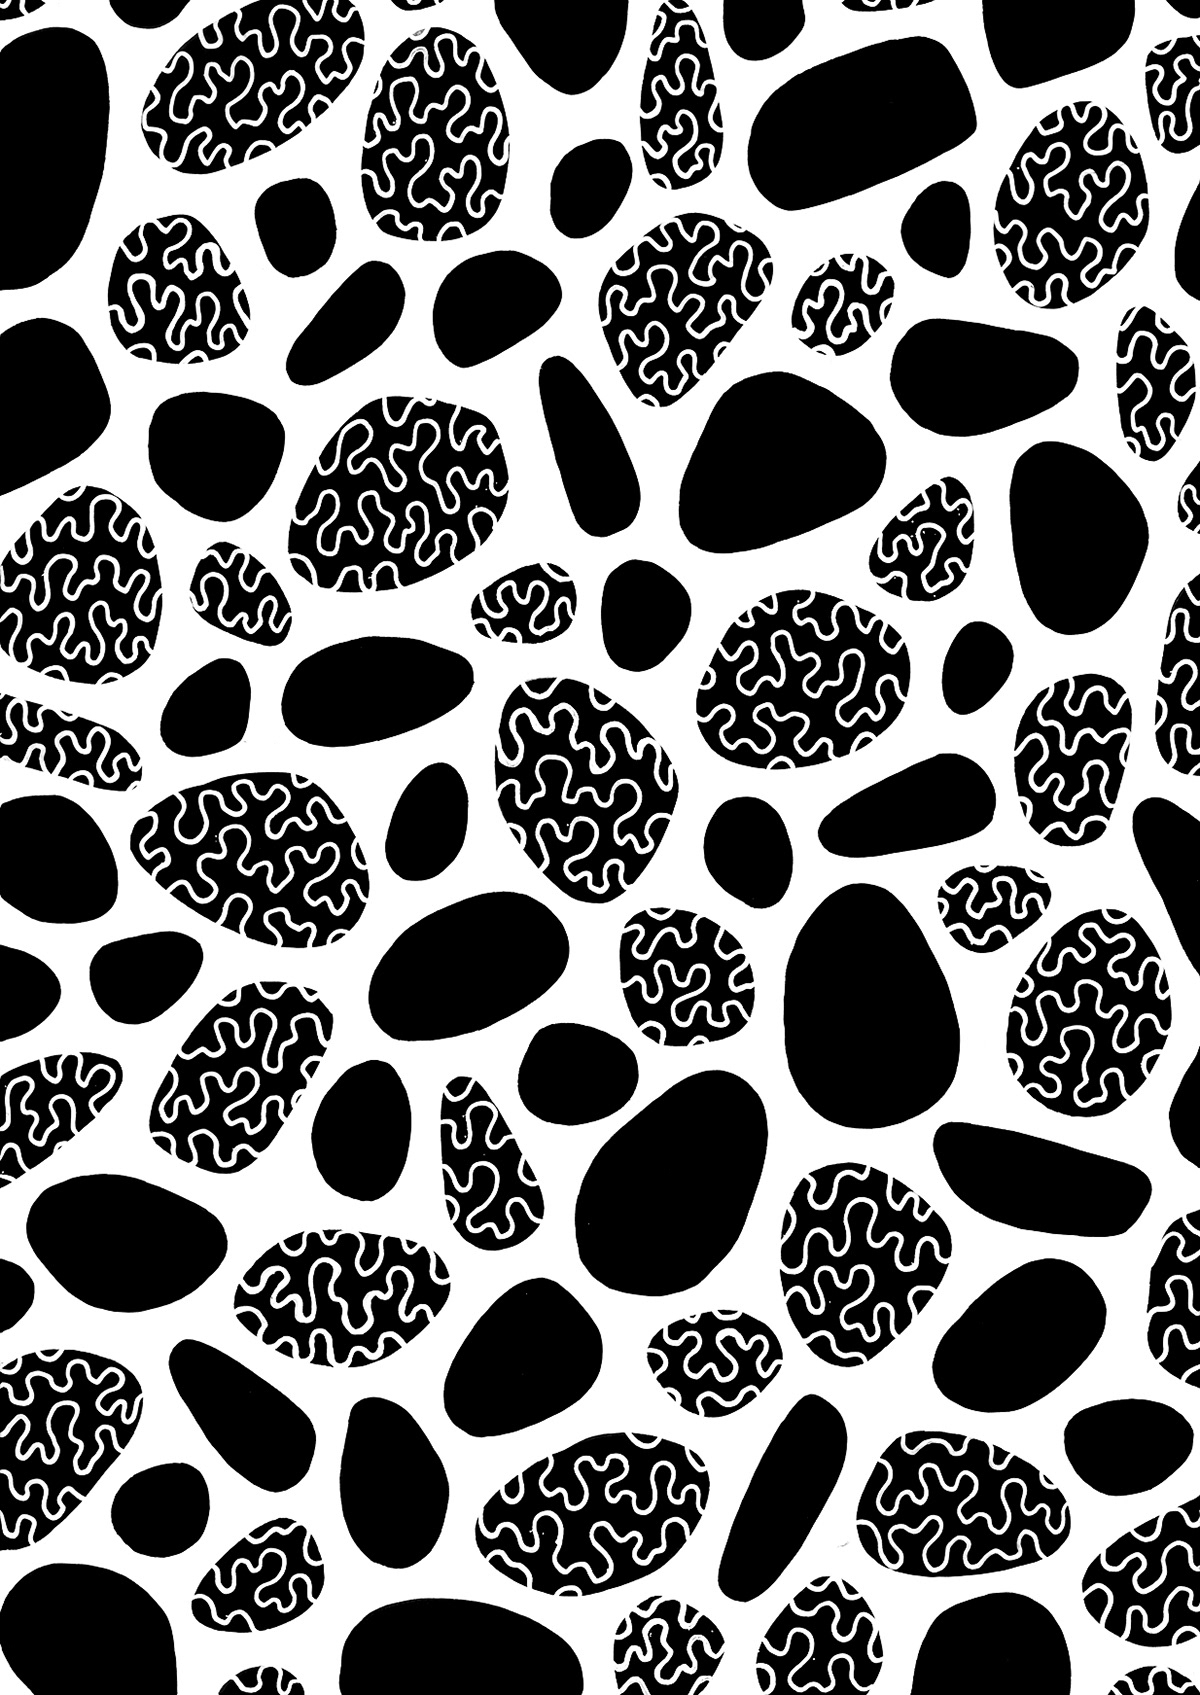 Abstract black and white pattern inspired by rocks on the beach of the Mediterranean, by Stillo Noir